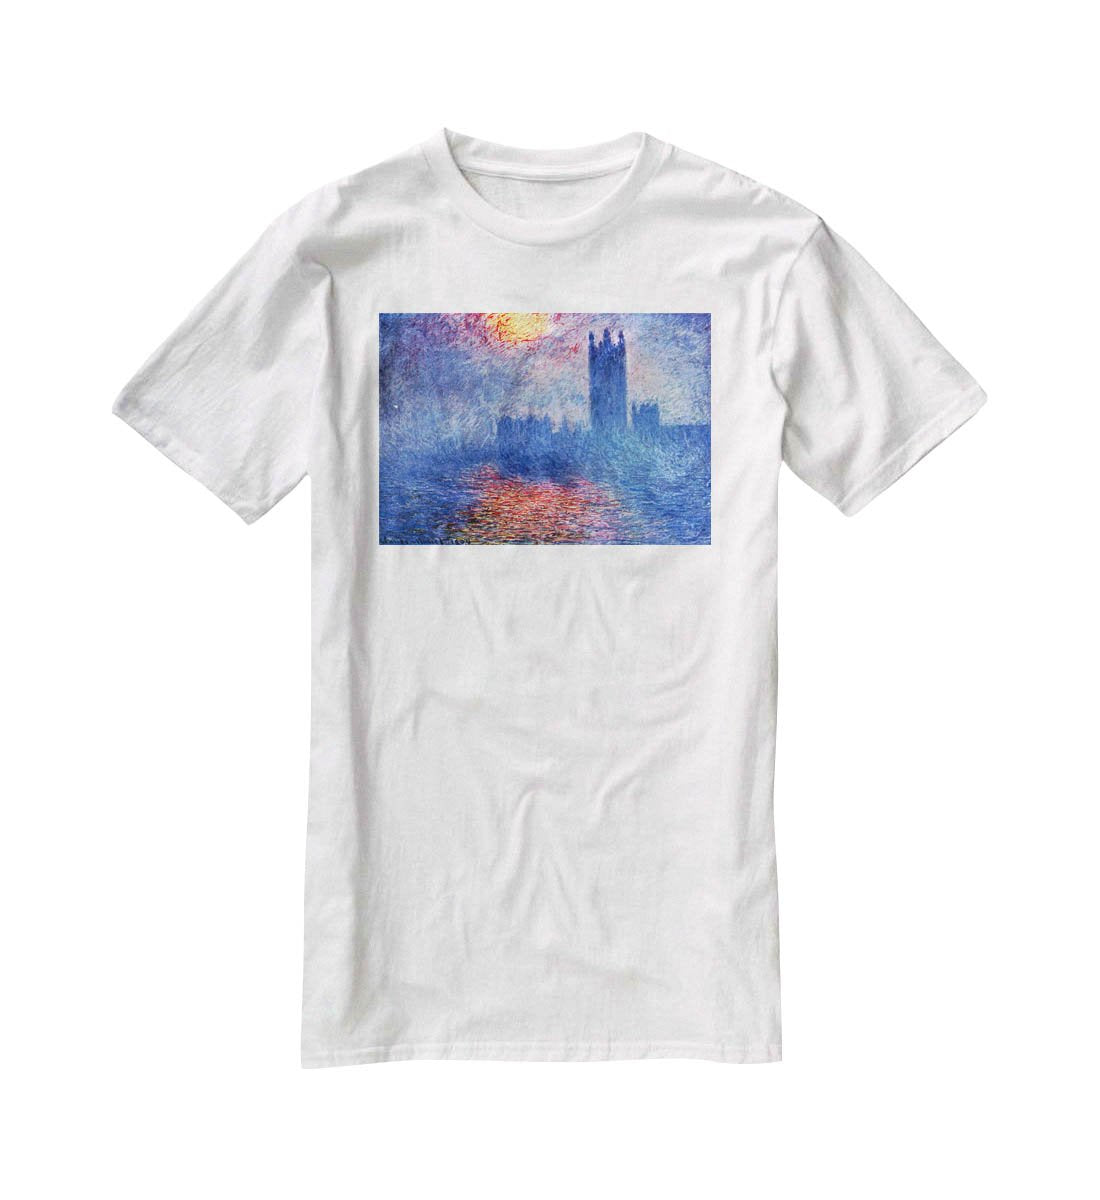 The Parlaiment in London by Monet T-Shirt - Canvas Art Rocks - 5